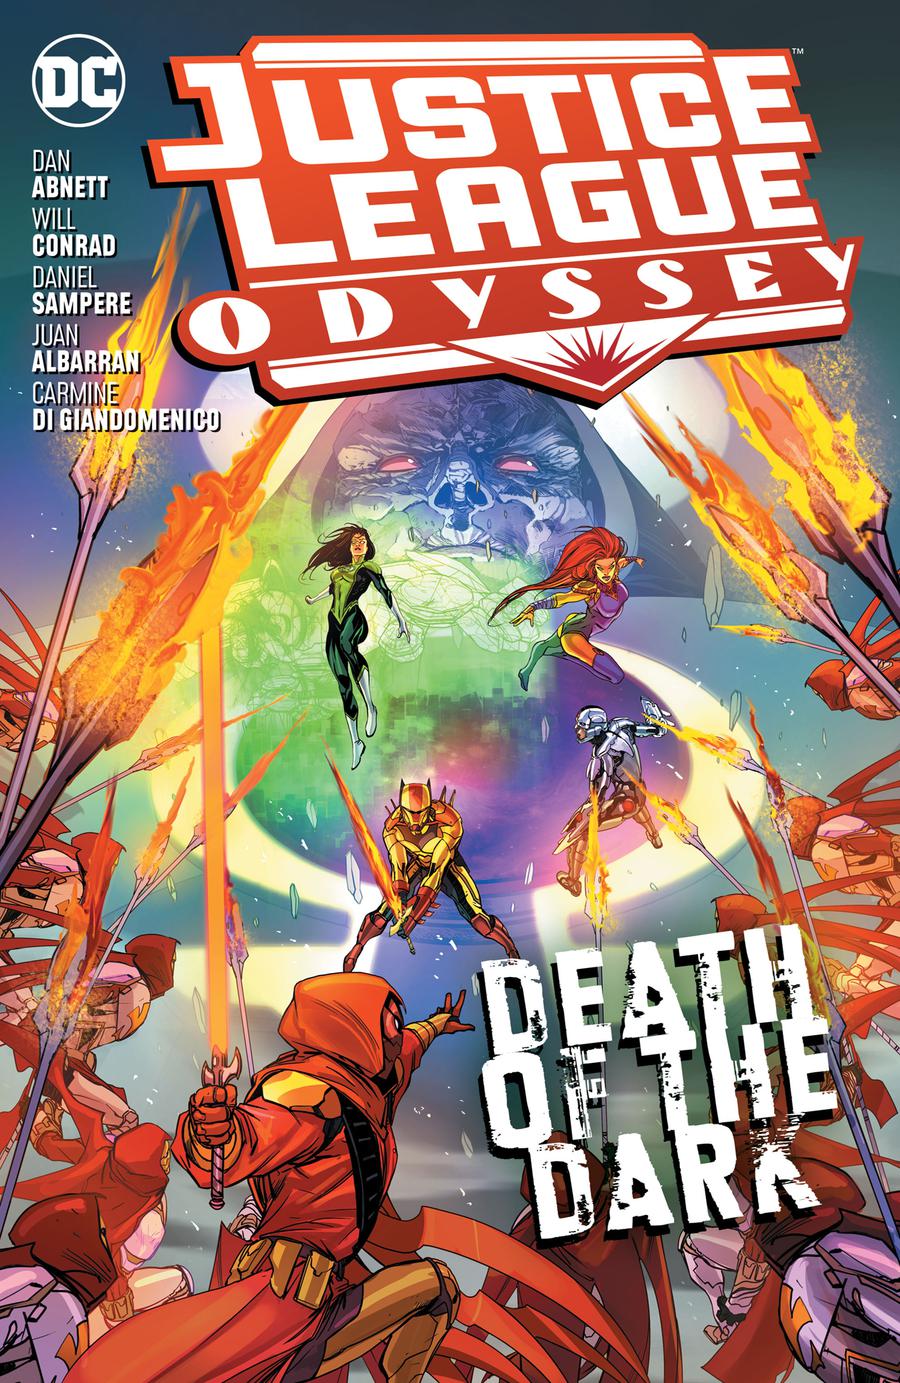 Justice League Odyssey Vol 2 Death Of The Dark TP